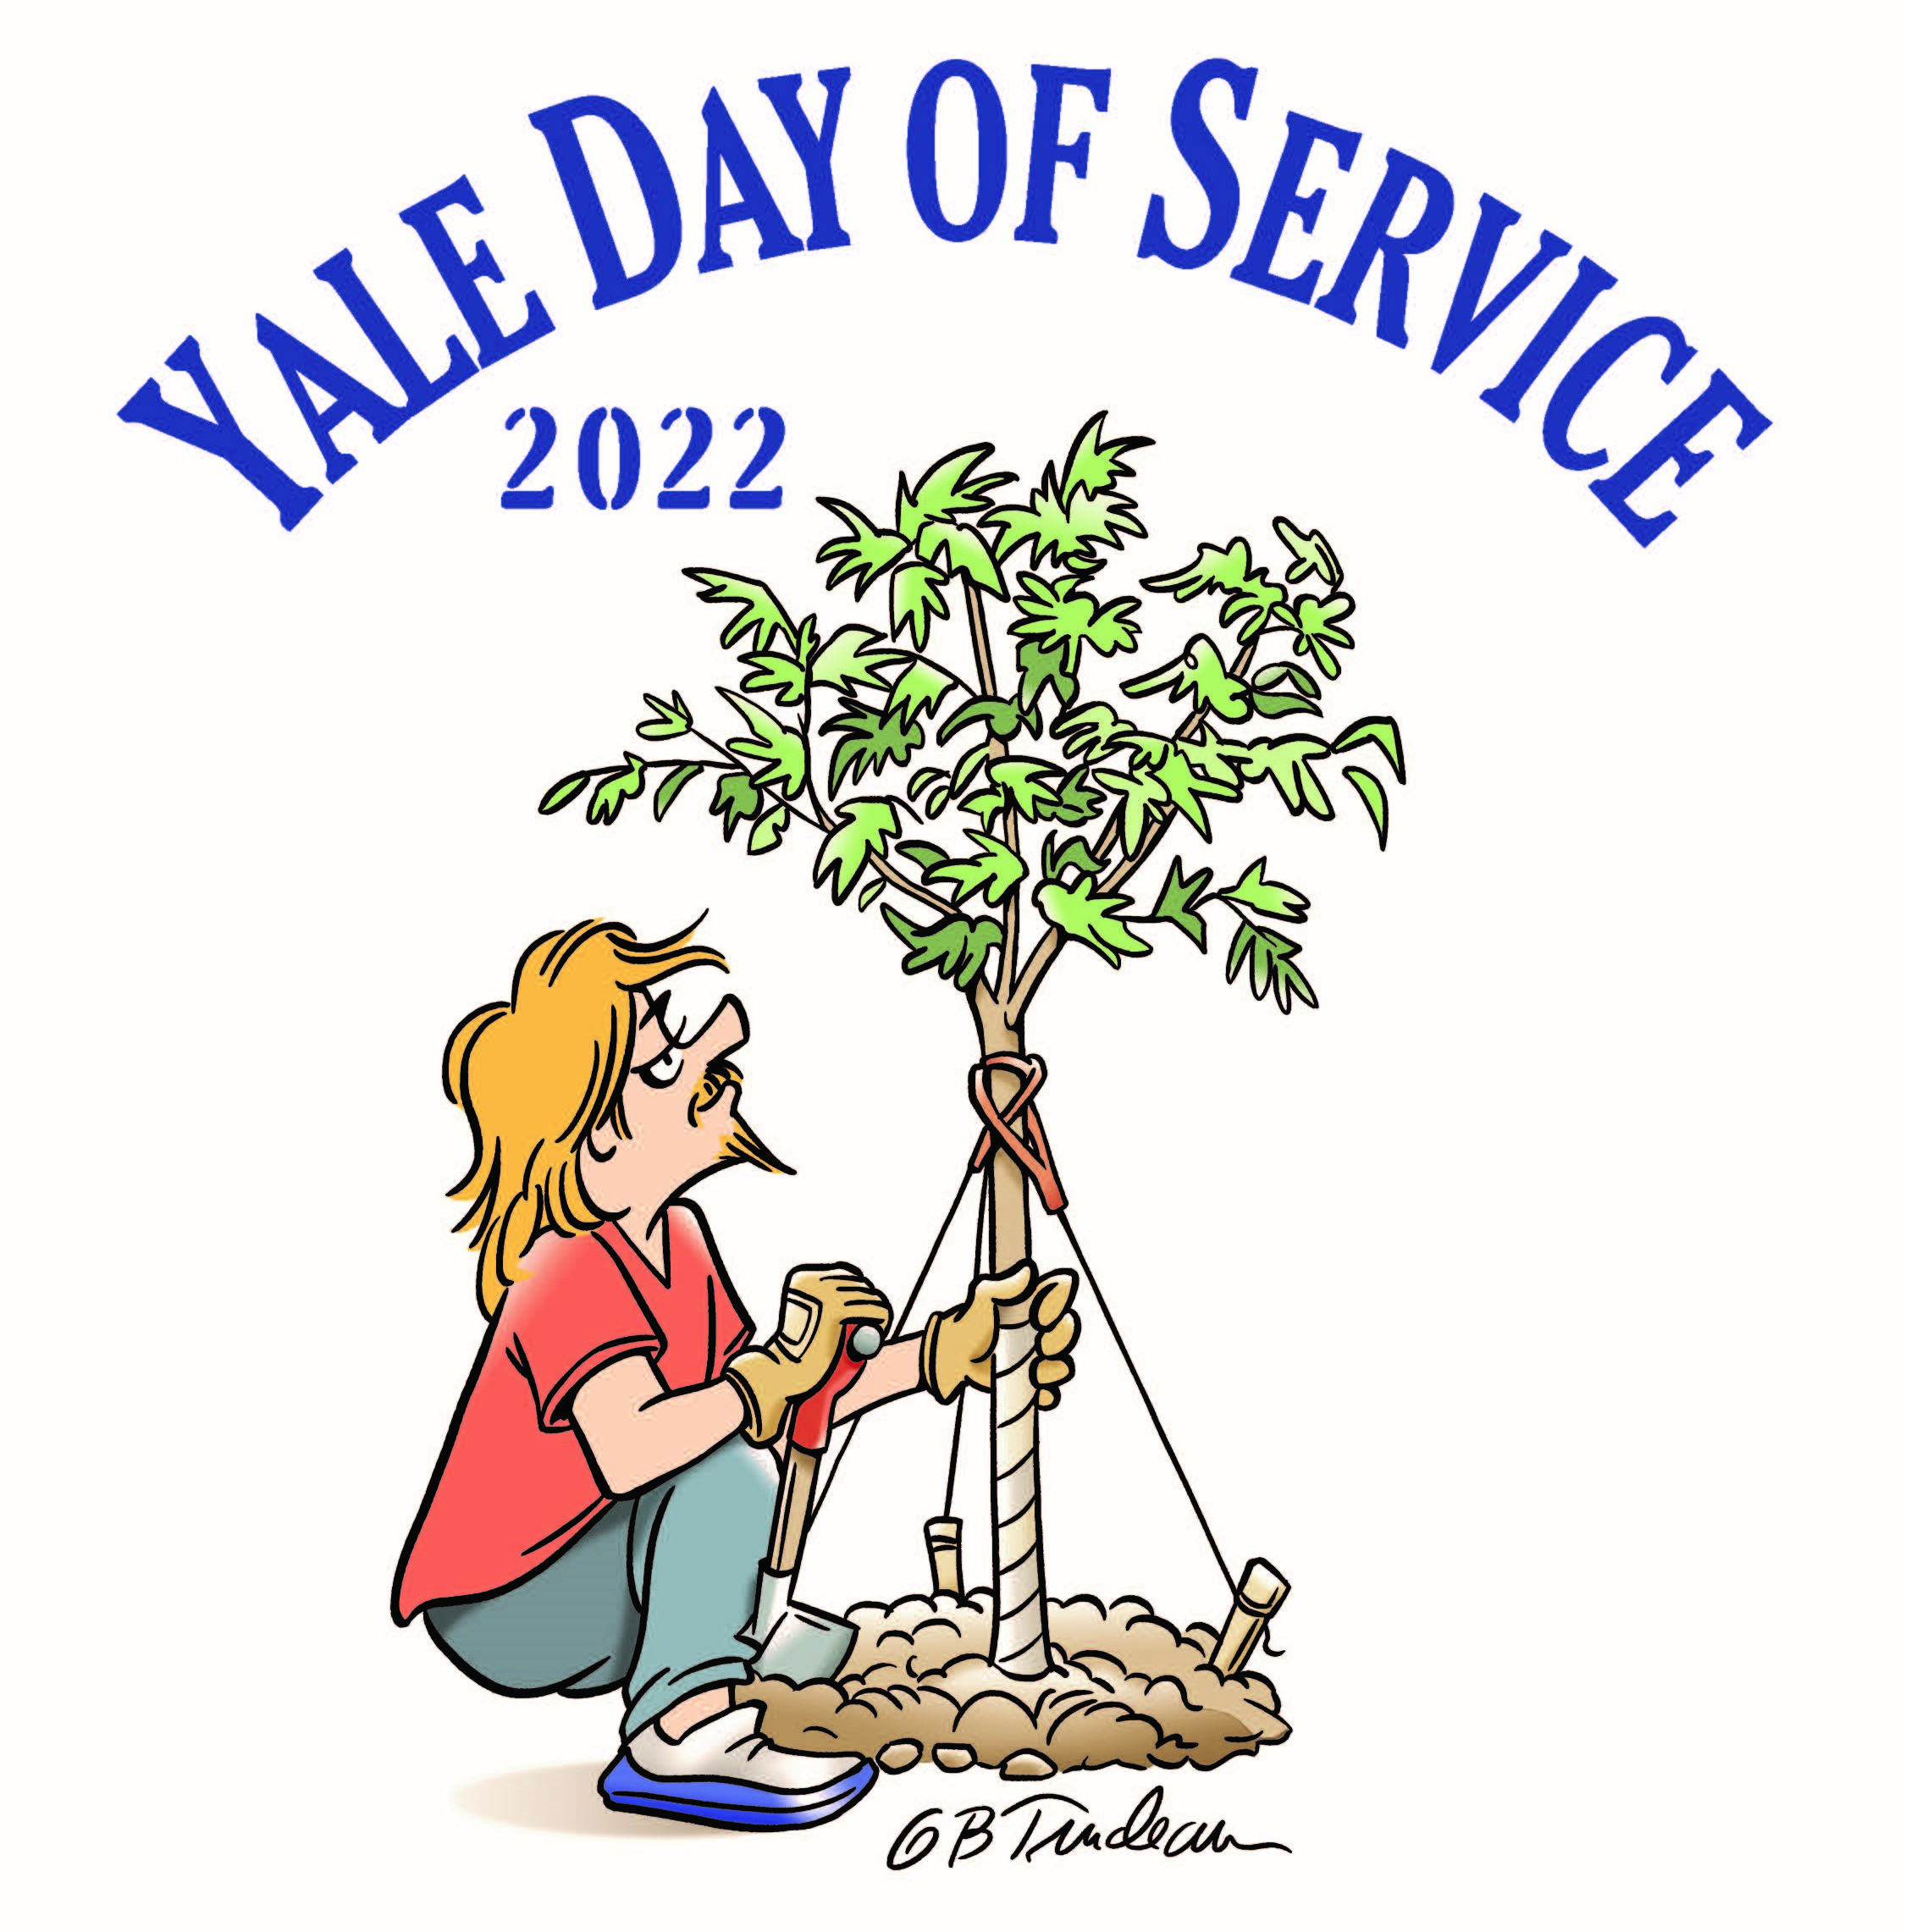 Yale Day of Service 2022 graphic design by Garry Trudeau